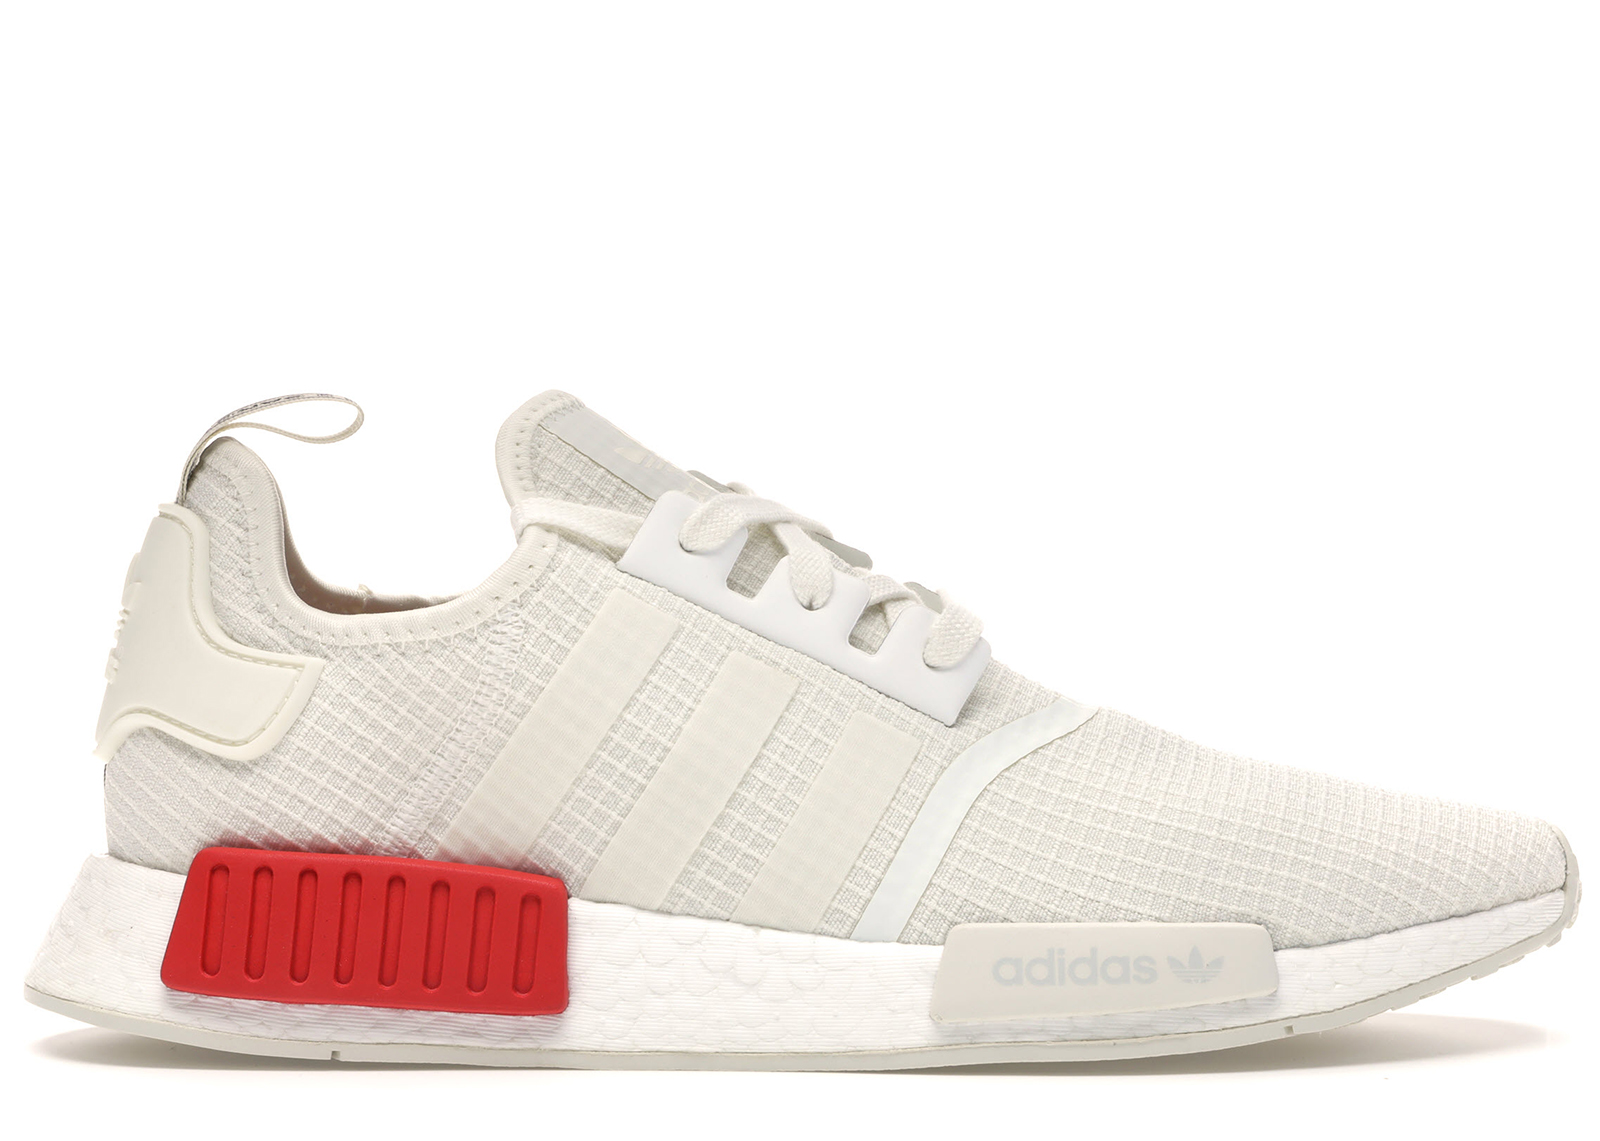 adidas nmd r1 white red